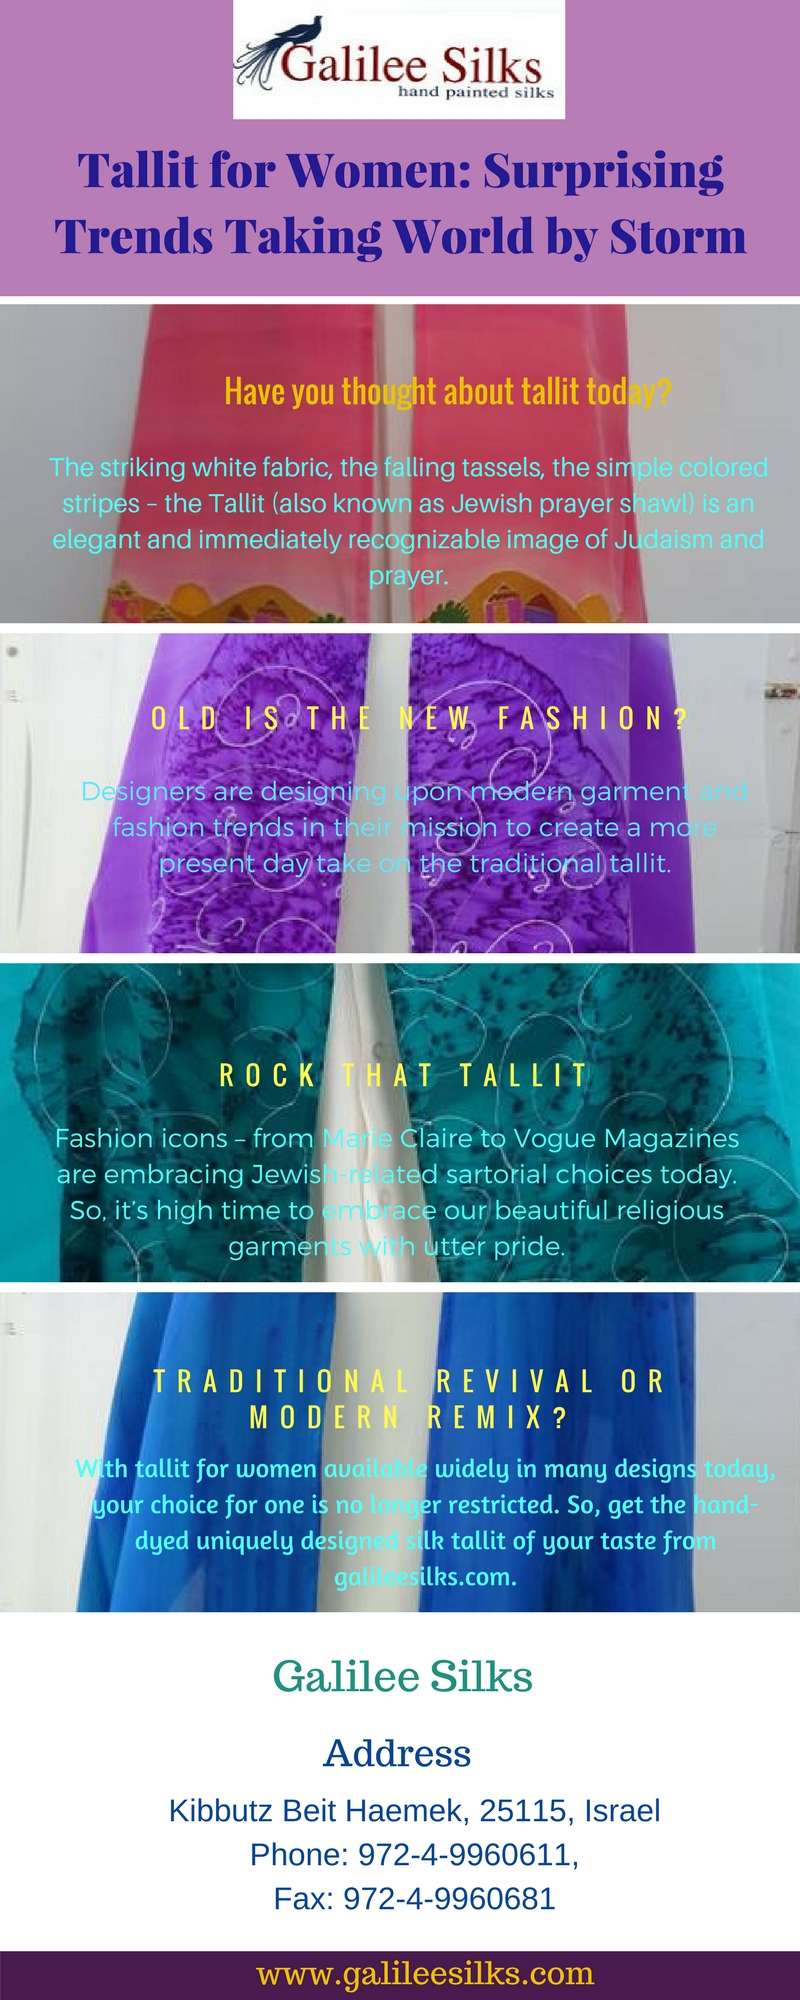 Tallit for Women Surprising Trends Taking World by Storm.jpg Jewish prayer shawl is getting its moment of glam. With fashion trends changing rapidly, embrace yourself with contemporary designed modern Jewish tallit today. For more details, visit this link: https://silktallit.wordpress.com/2018/04/10/tallit-for-wome by amramrafi